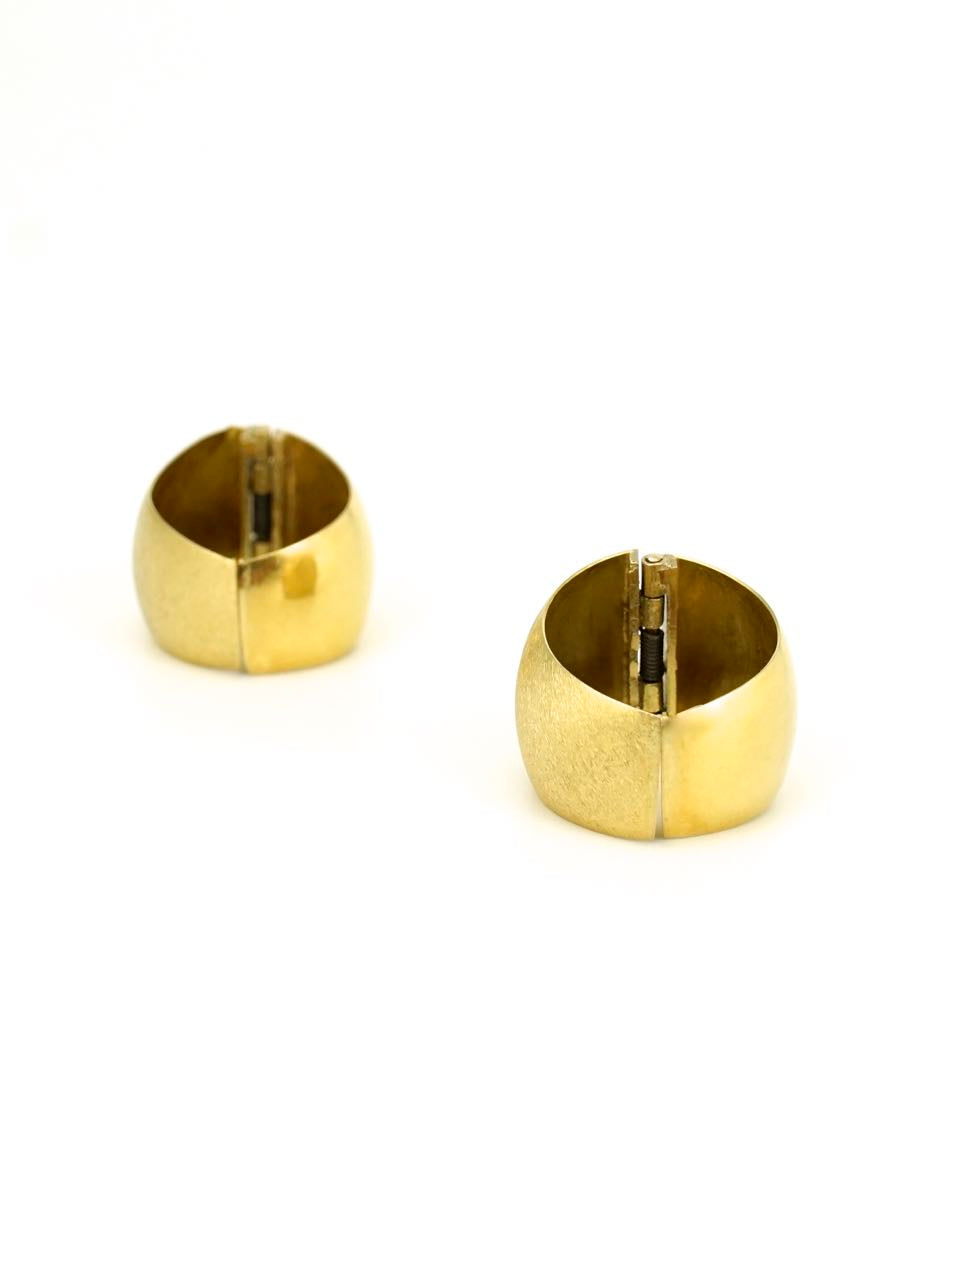 18k yellow gold double sided clip earrings 1960s